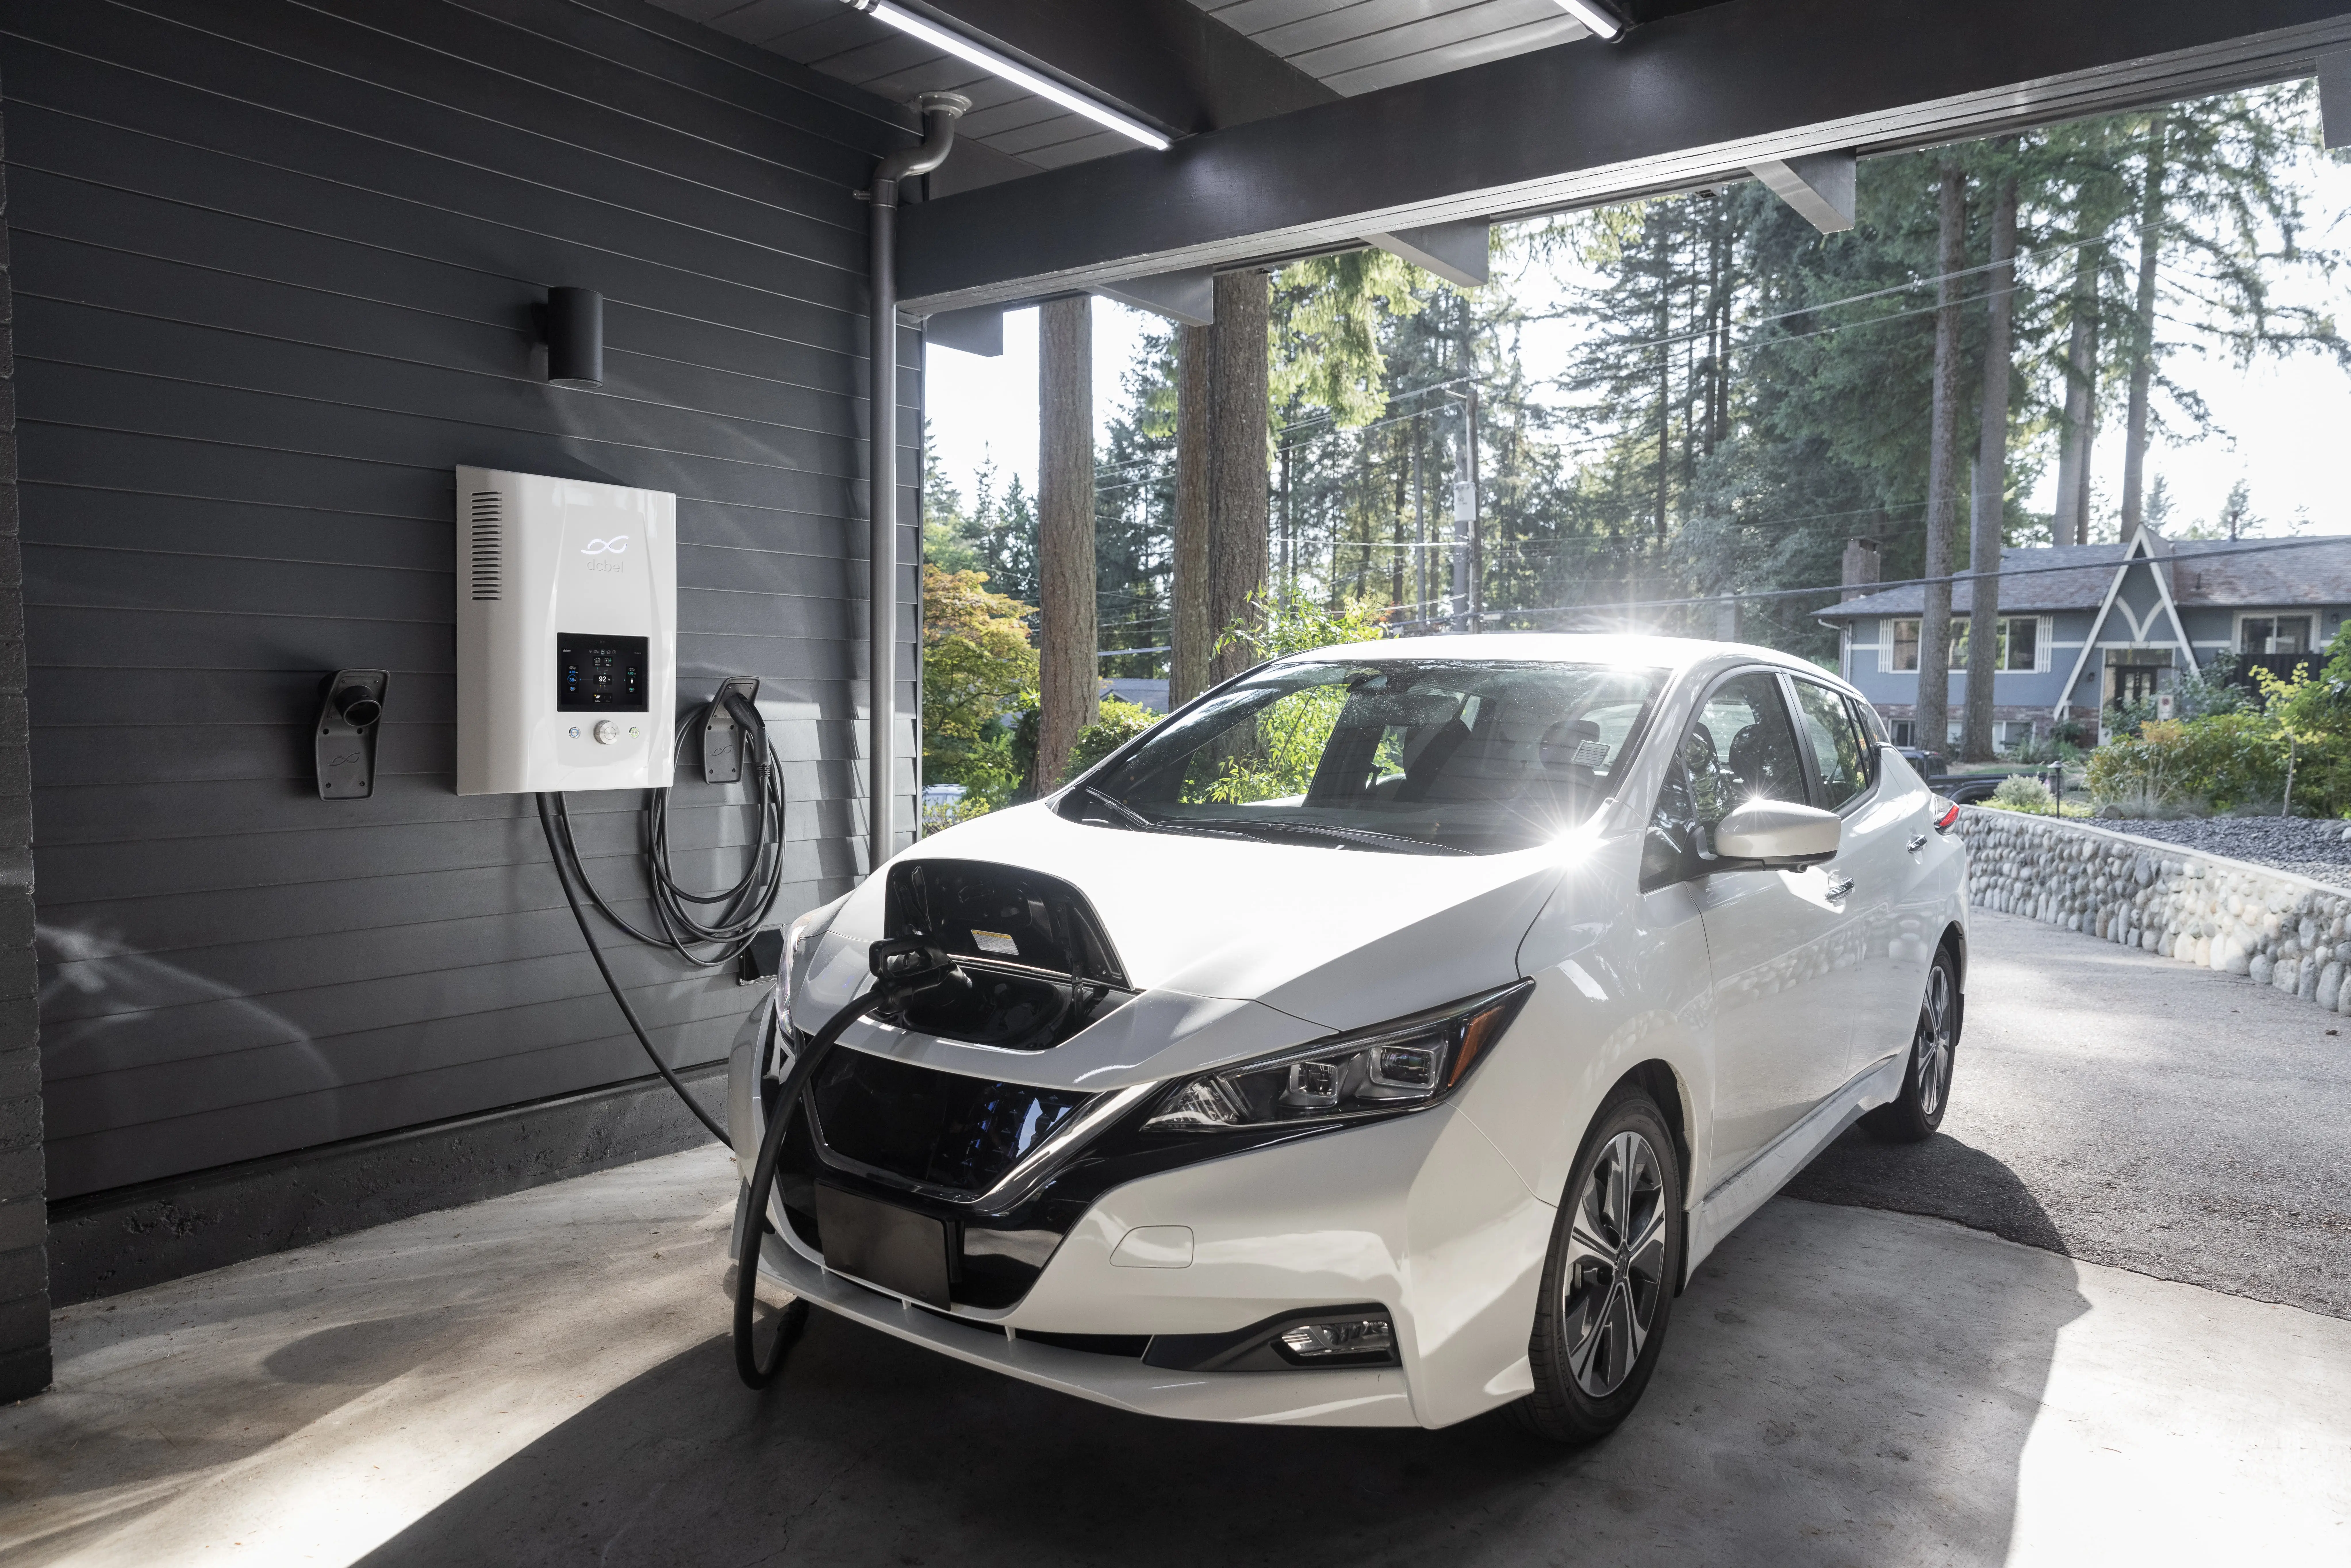 A white electric-powered Nissan Leaf car charges in a garage.